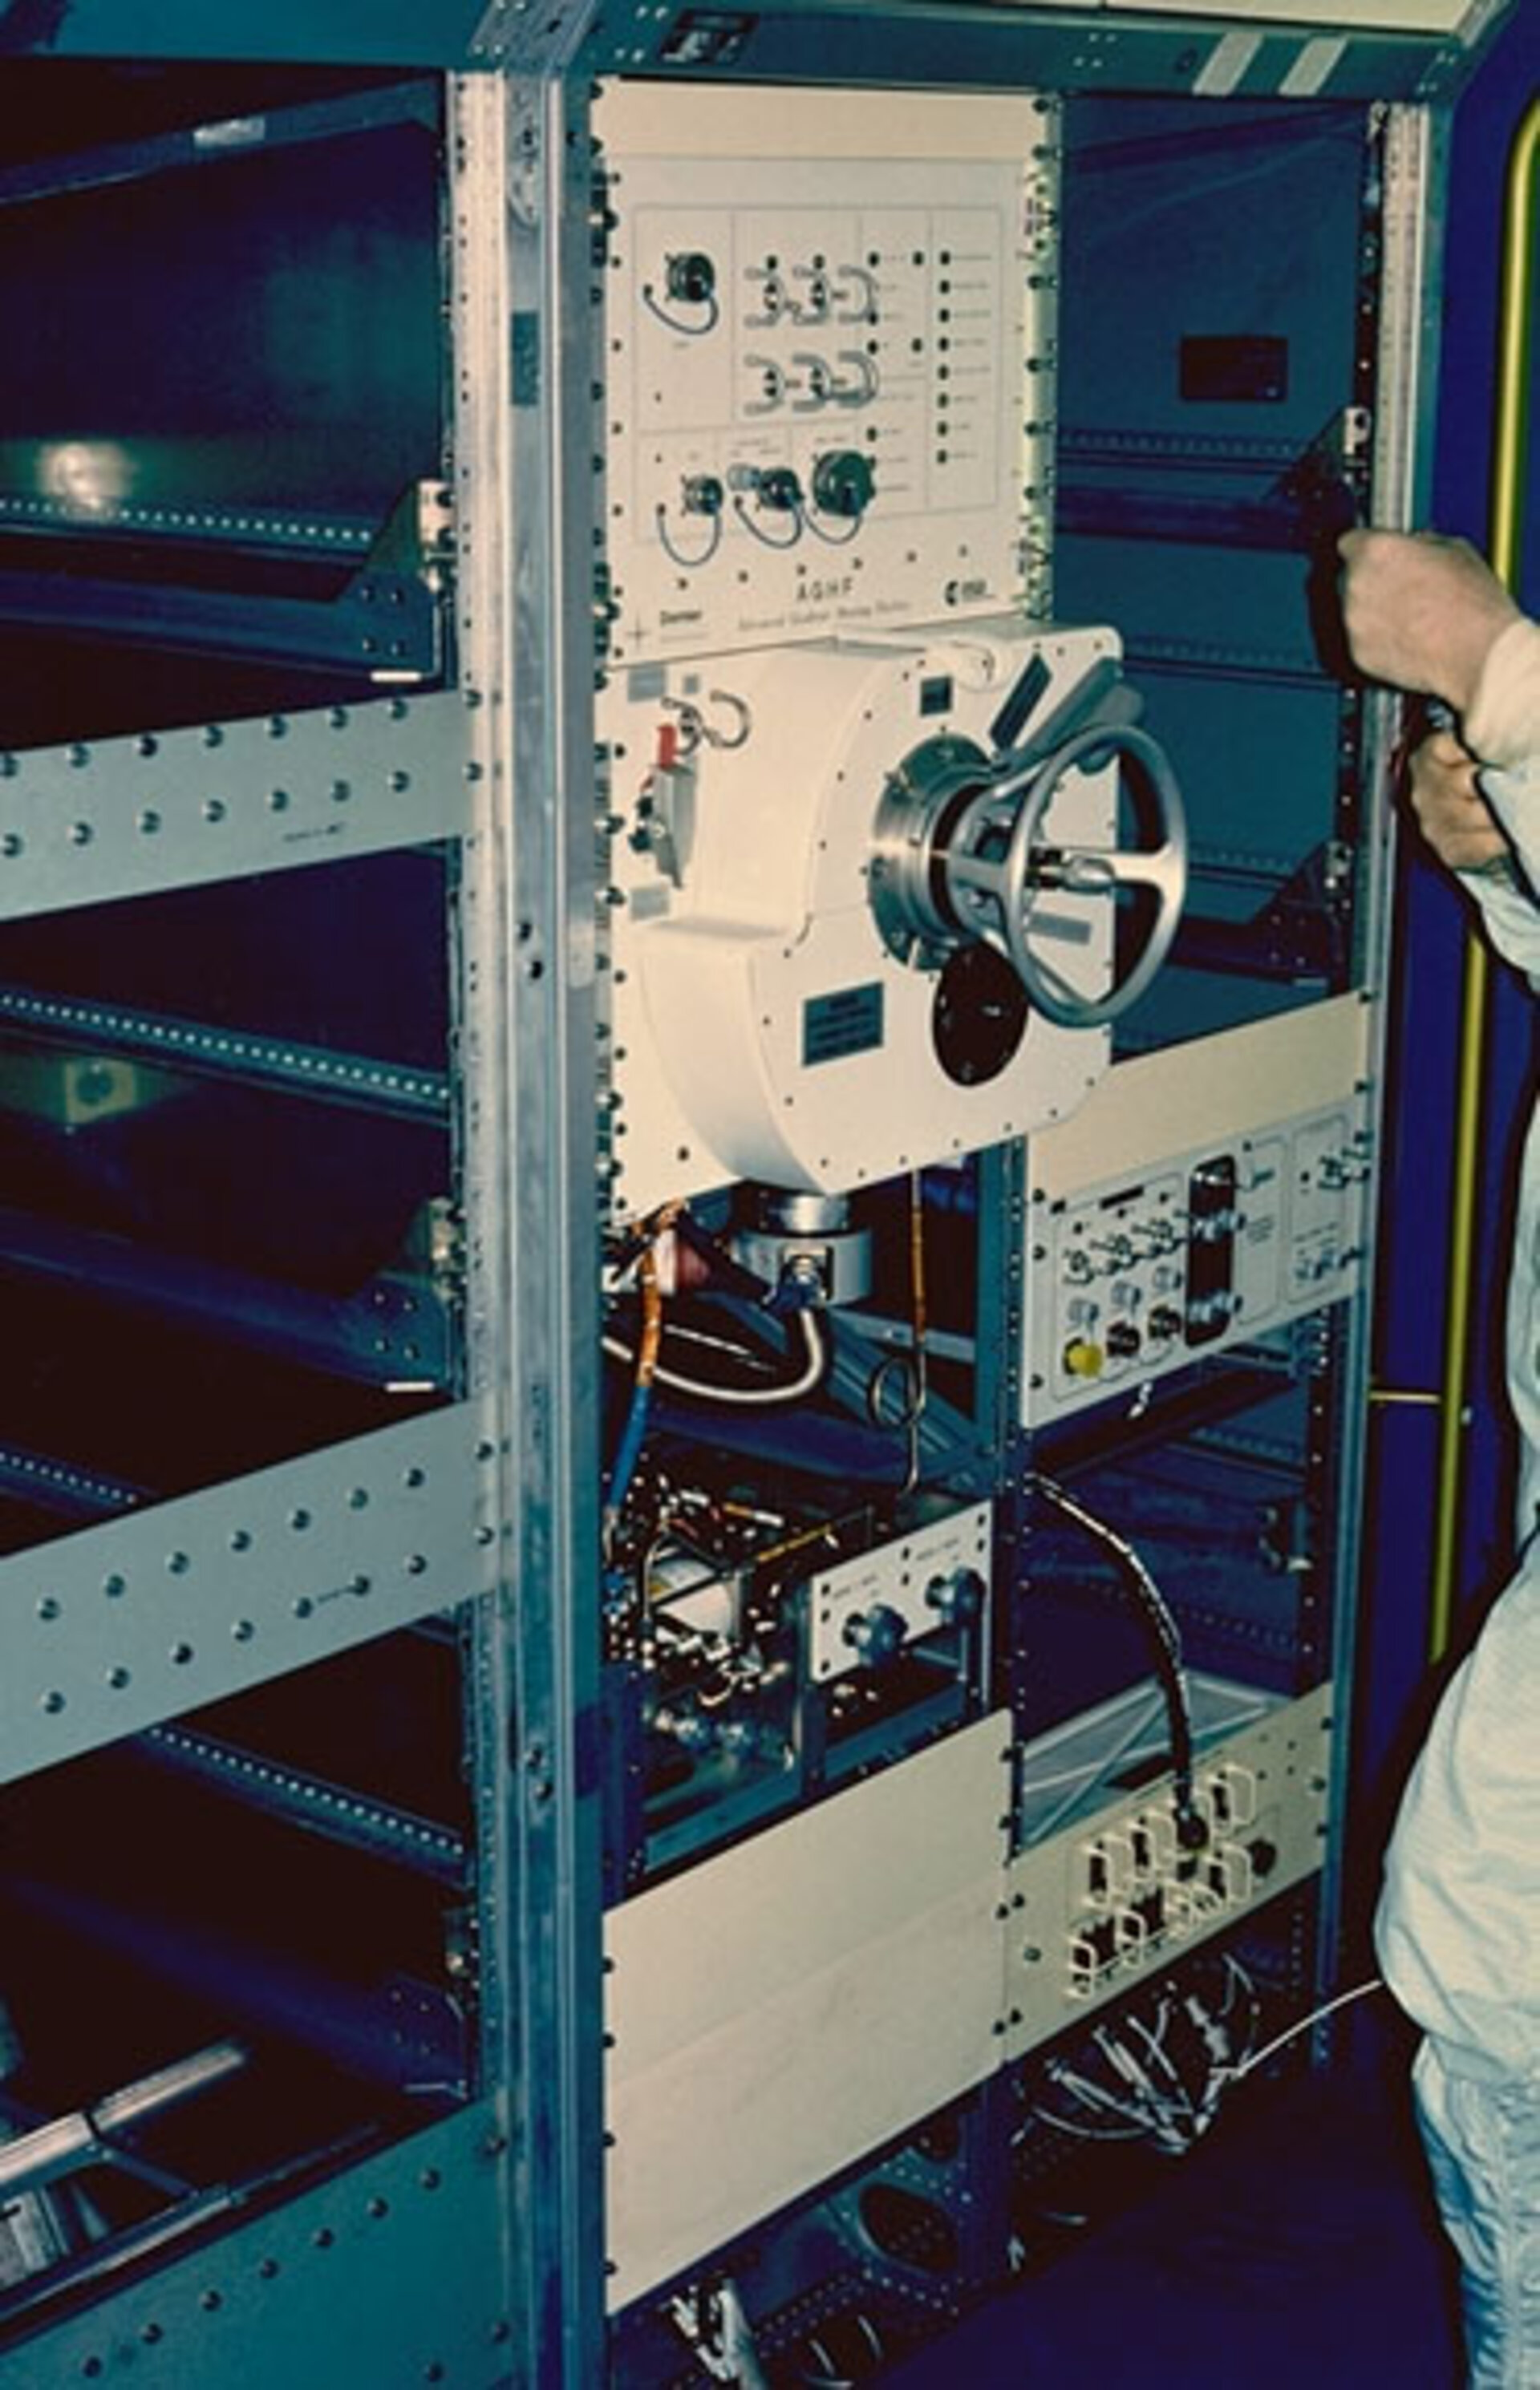 AGHF integration in Spacelab rack for STS-78